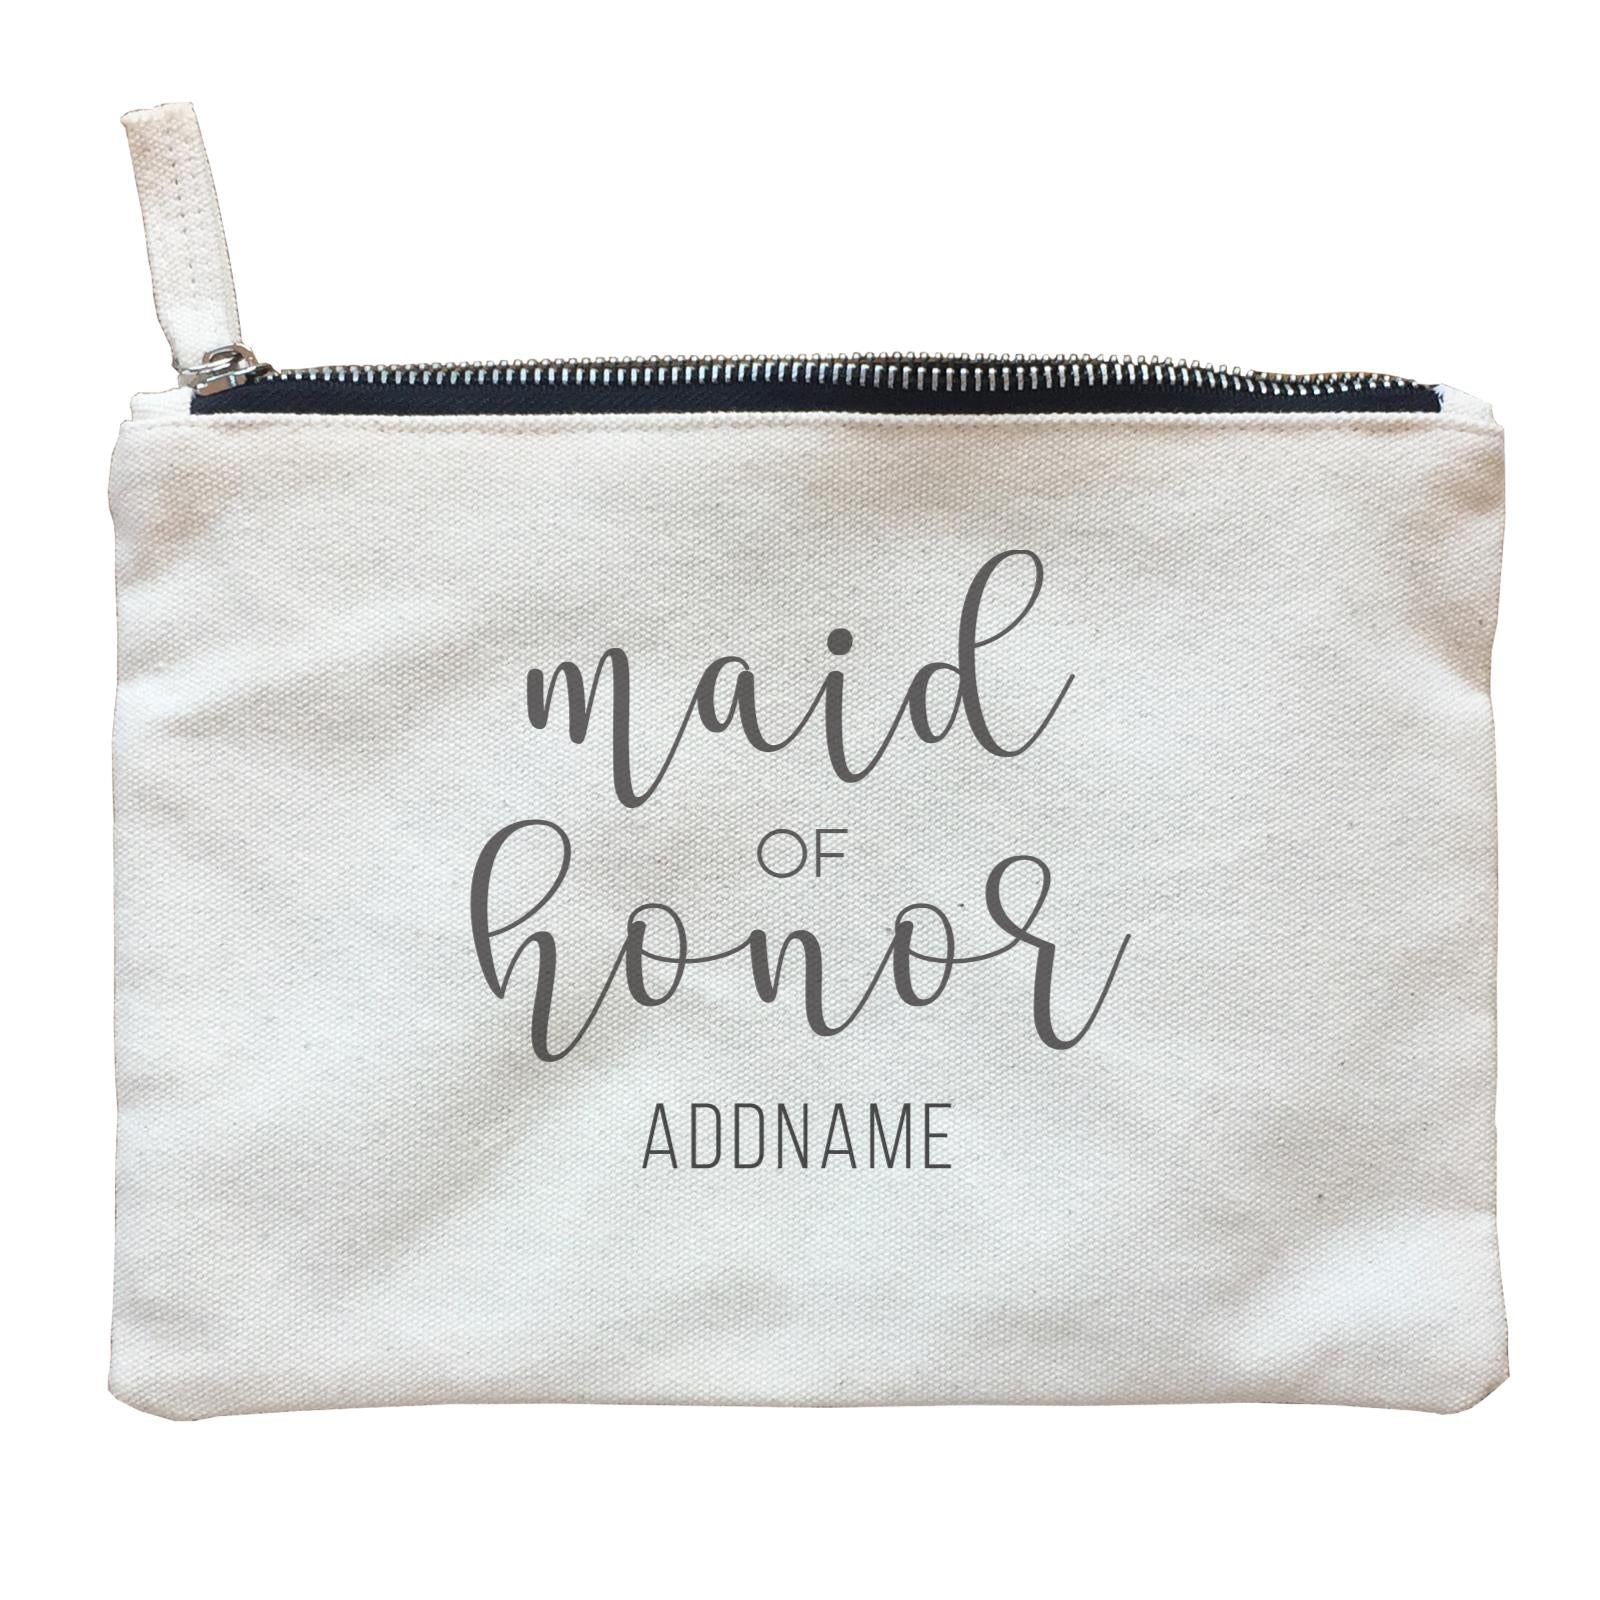 Bridesmaid Calligraphy Maid Of Honour Subtle Addname Zipper Pouch